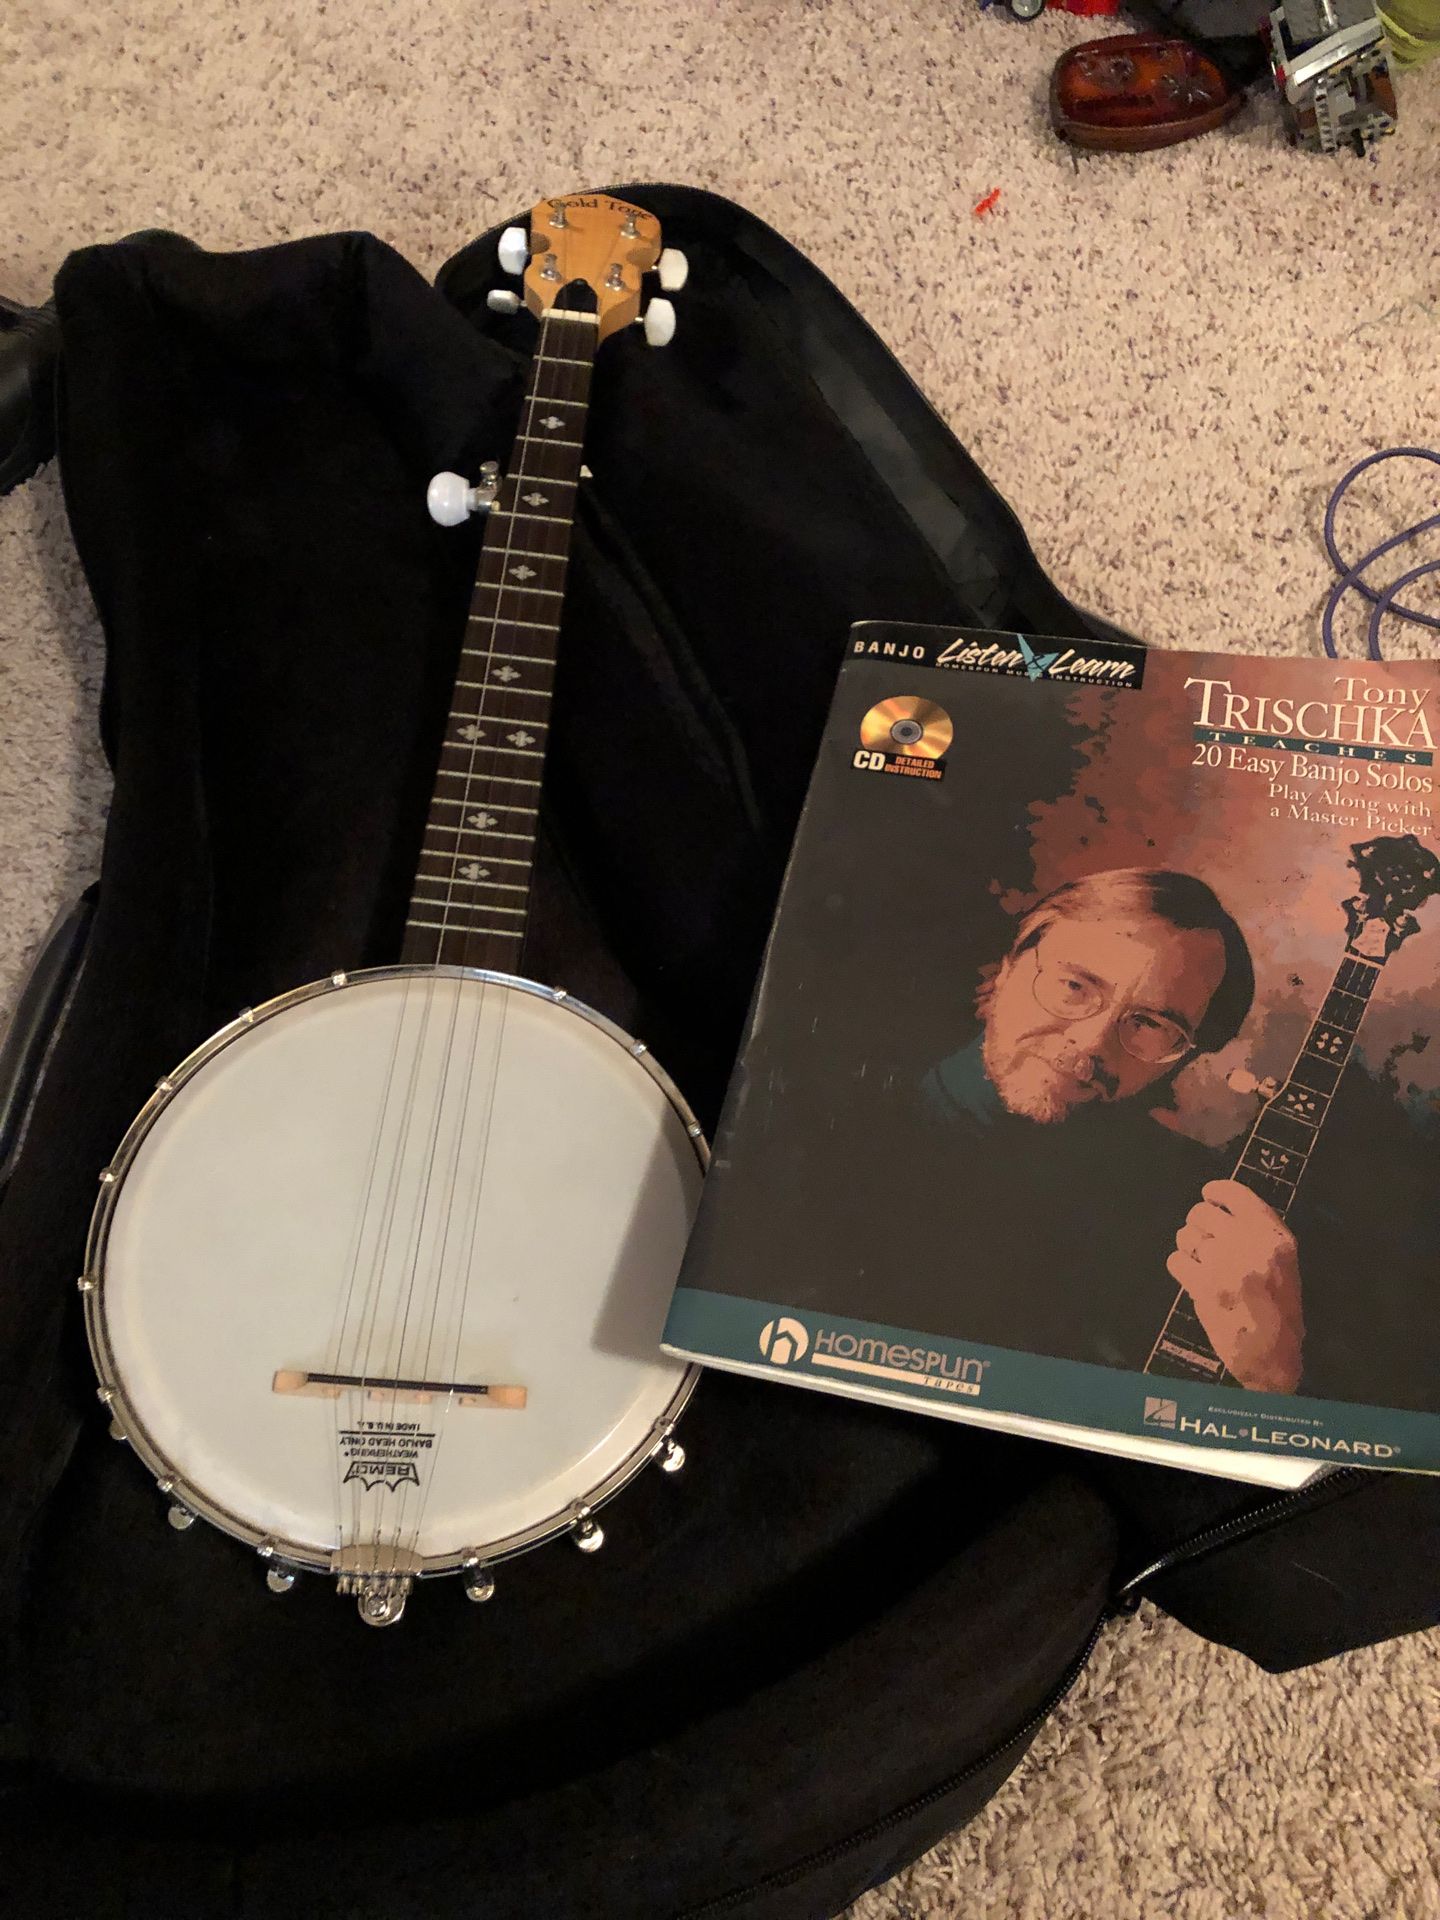 Banjo and case and playbook and case